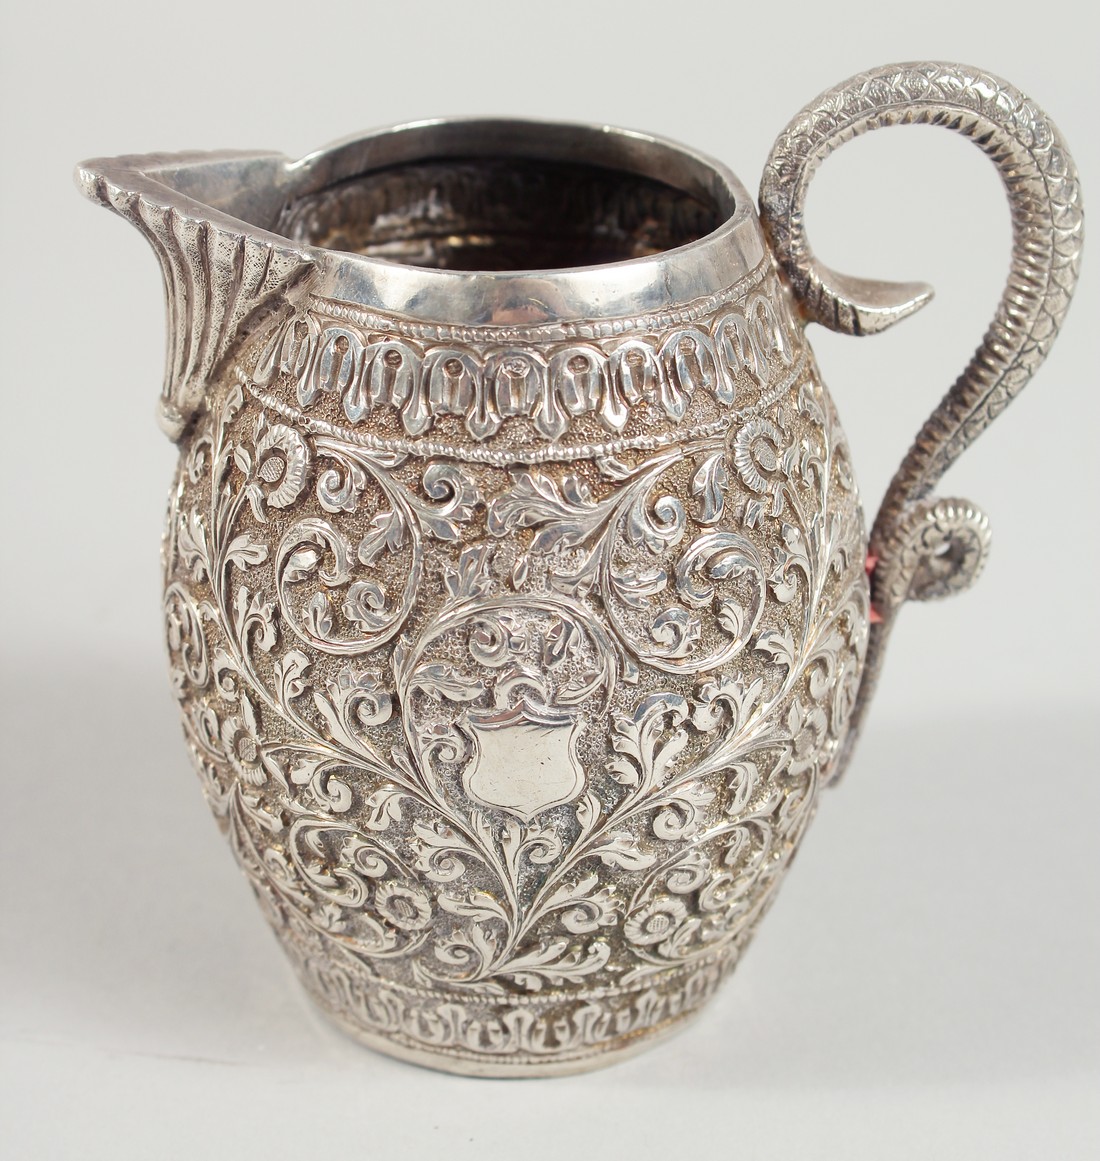 AN INDIAN WHITE METAL ENGRAVED AND CHASED CREAM JUG, with scrolling foliate decoration. 9.5cm high.